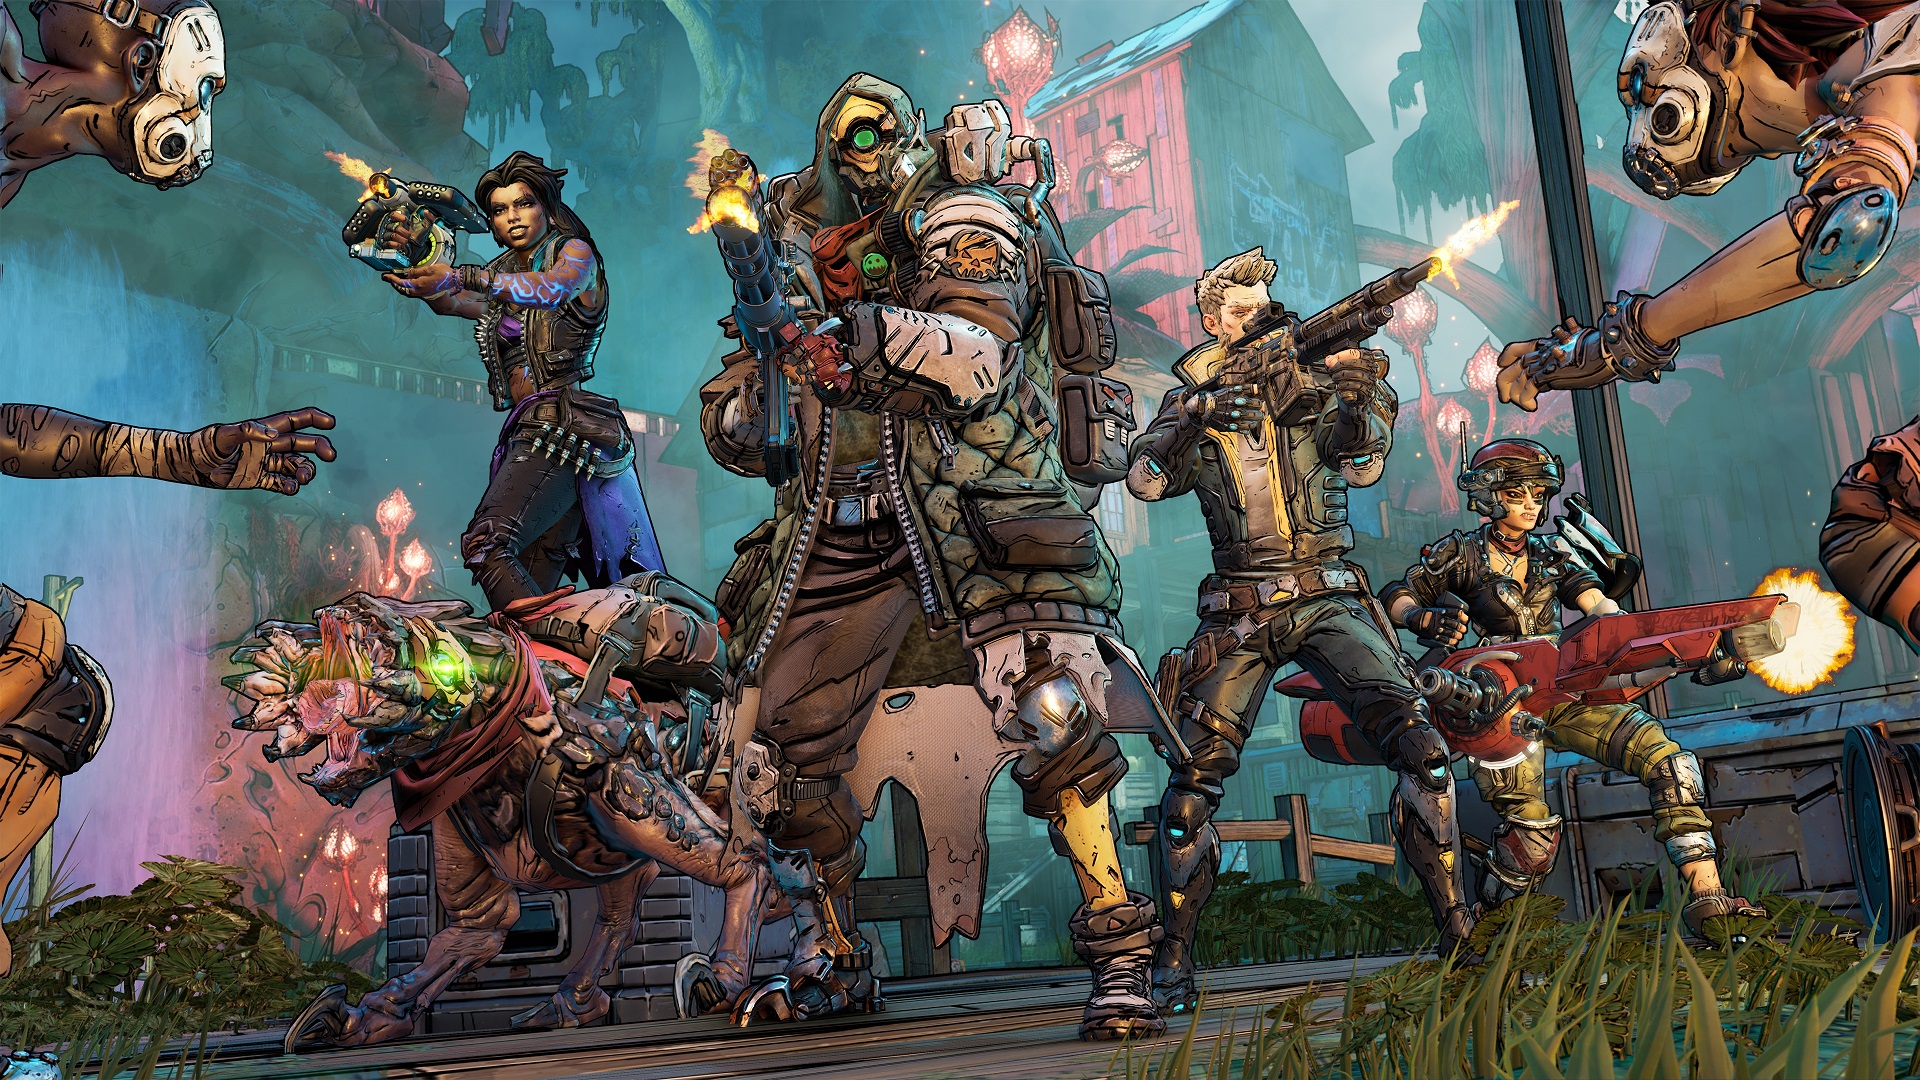 New Borderlands 3 Details for “Proving Grounds” and “Circle of Slaughter” Modes